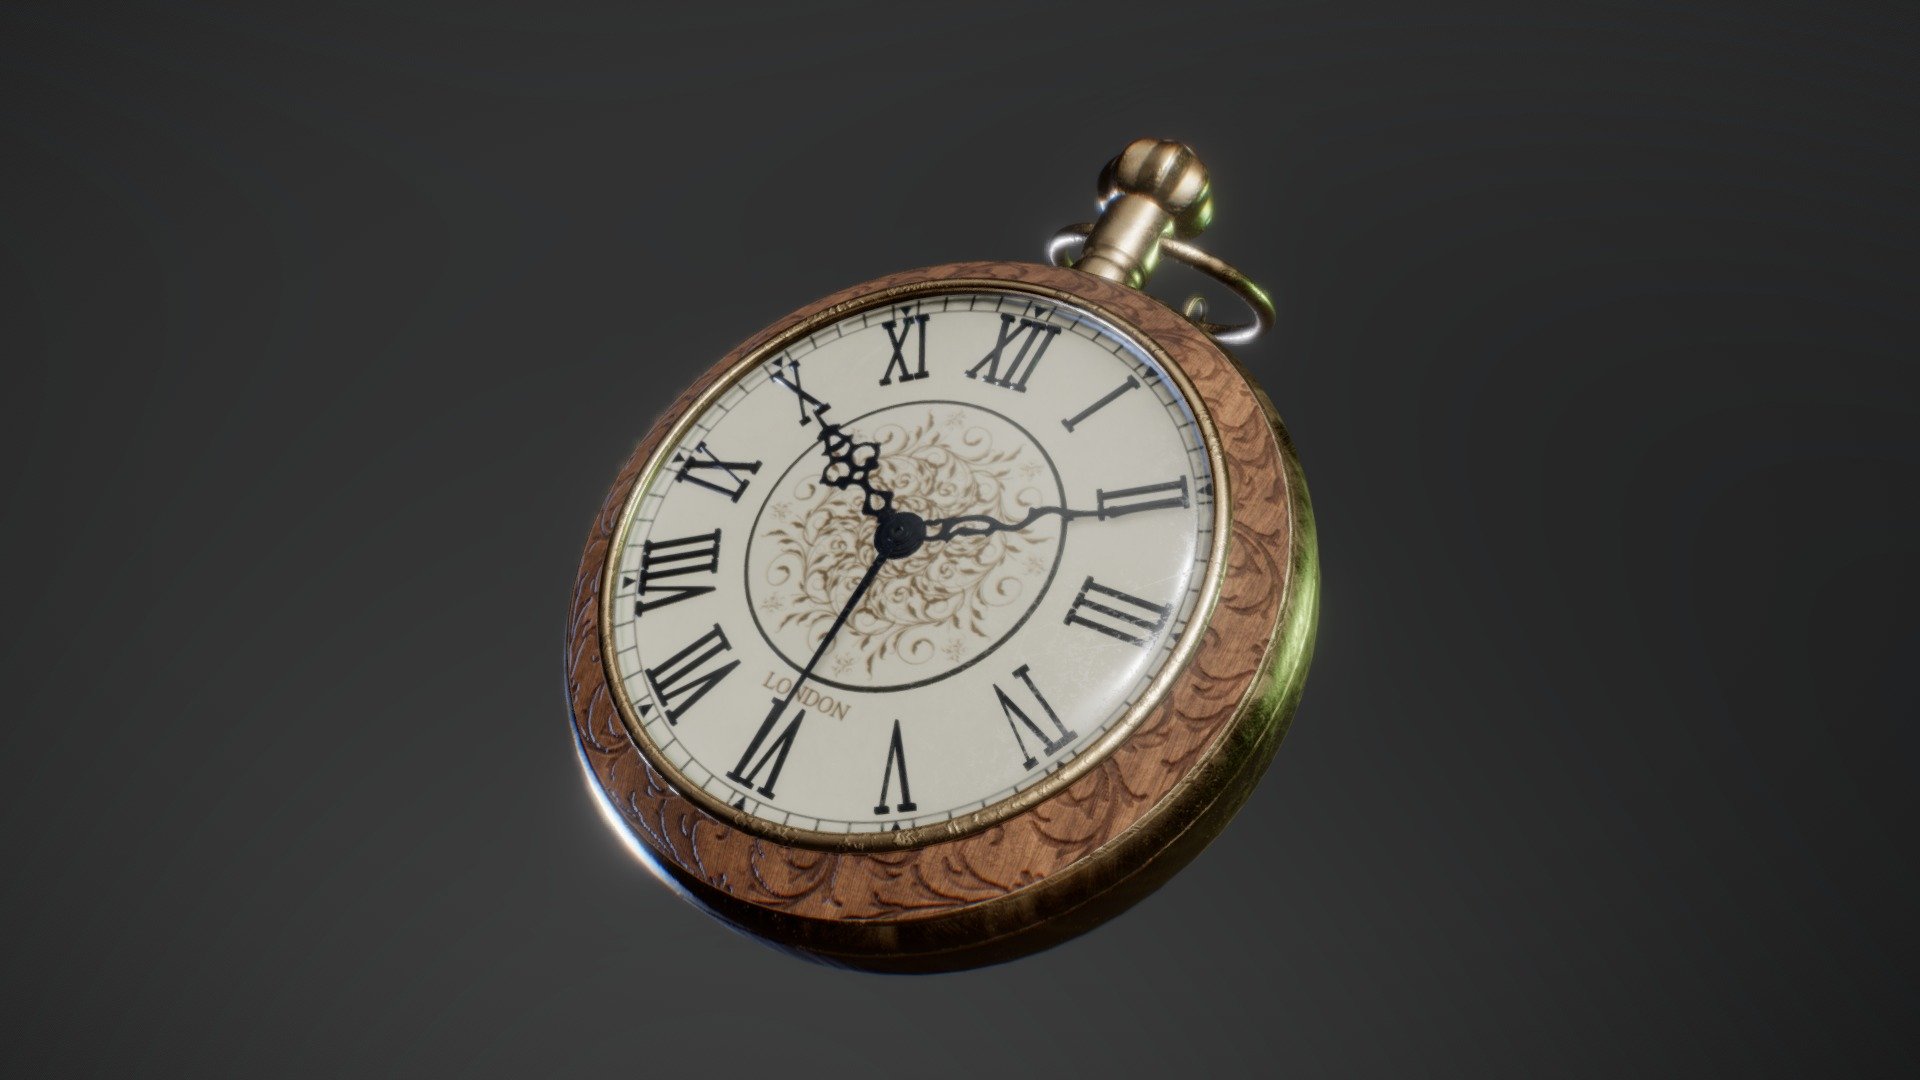 Festina Watch - 3D model by lovemakeshare (@lovemakeshare) [daf00a3]